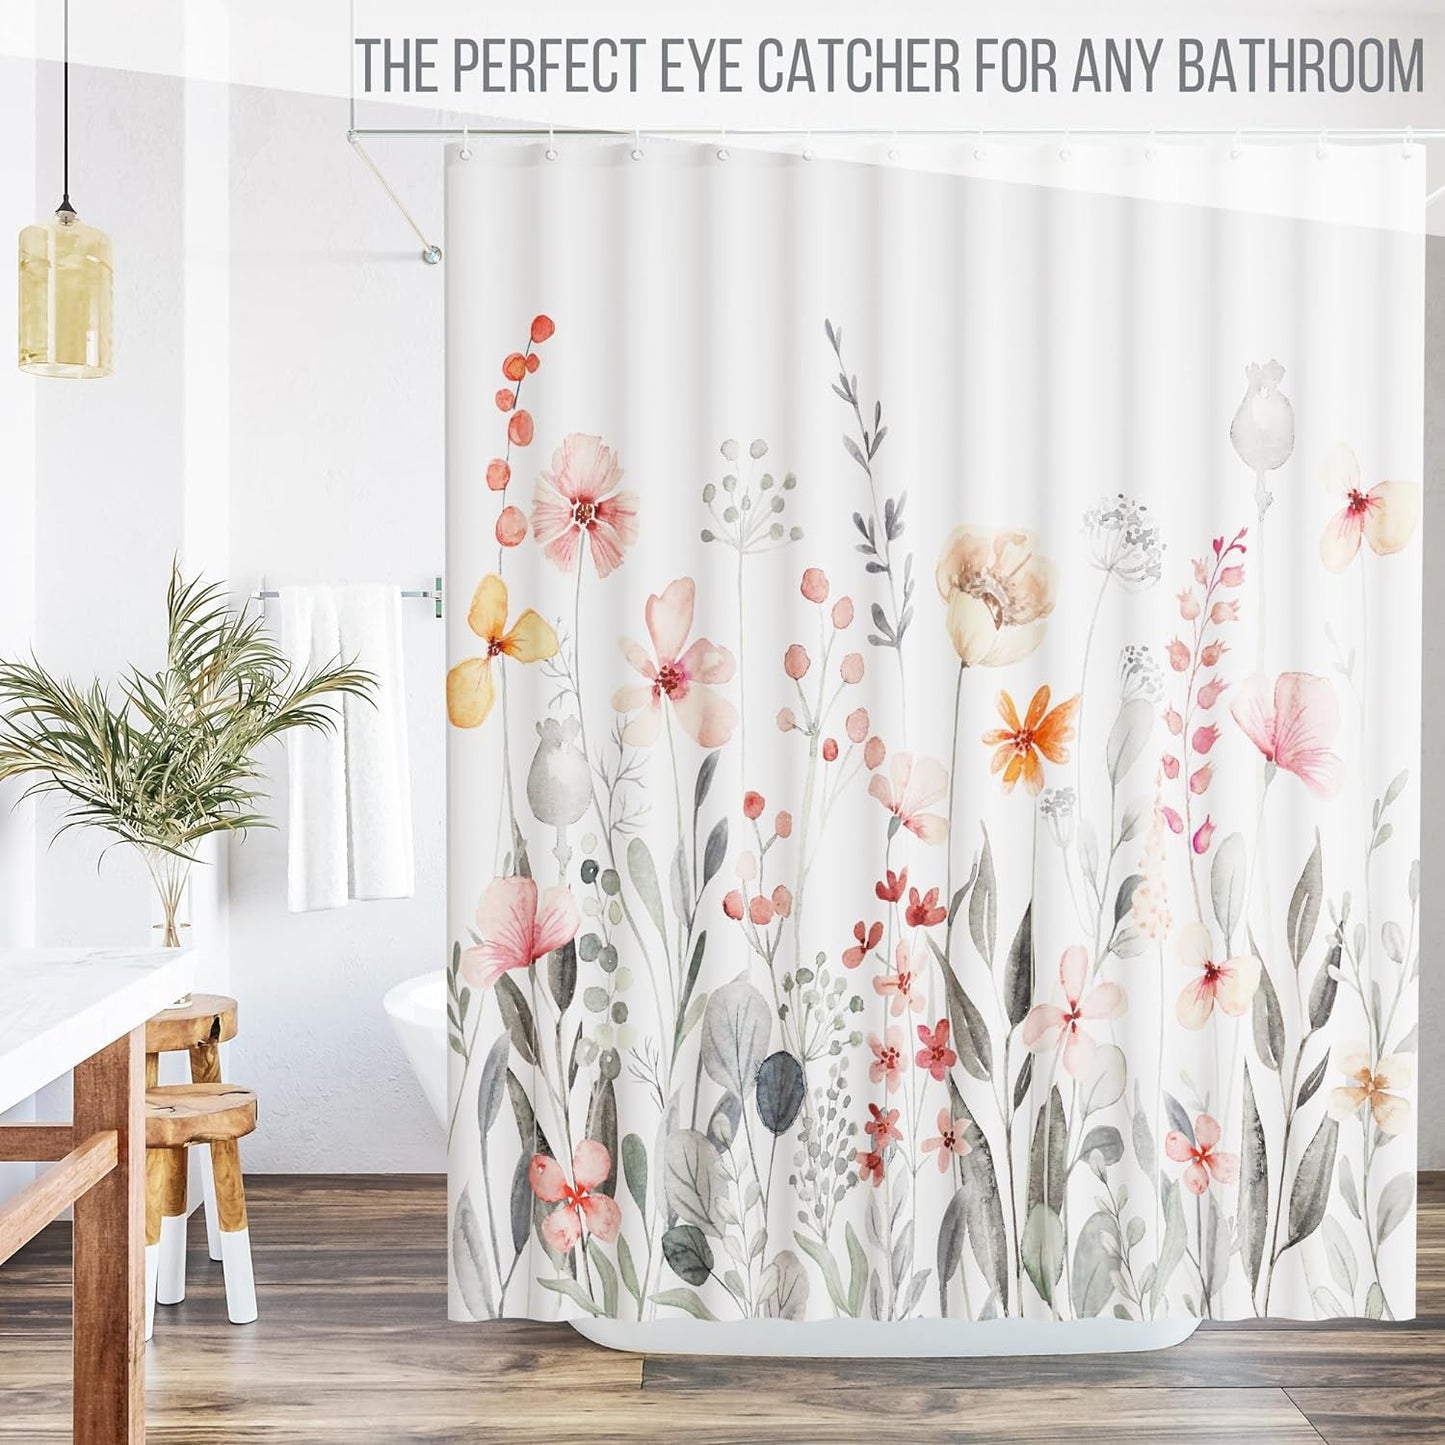 KIBAGA Beautiful Floral Shower Curtain for Your Bathroom - a Stylish 72" X 72" Curtain That Fits Perfect to Every Bath Decor - Ideal to Brighten up Your Cute Botanical Bathroom at Home with Plants